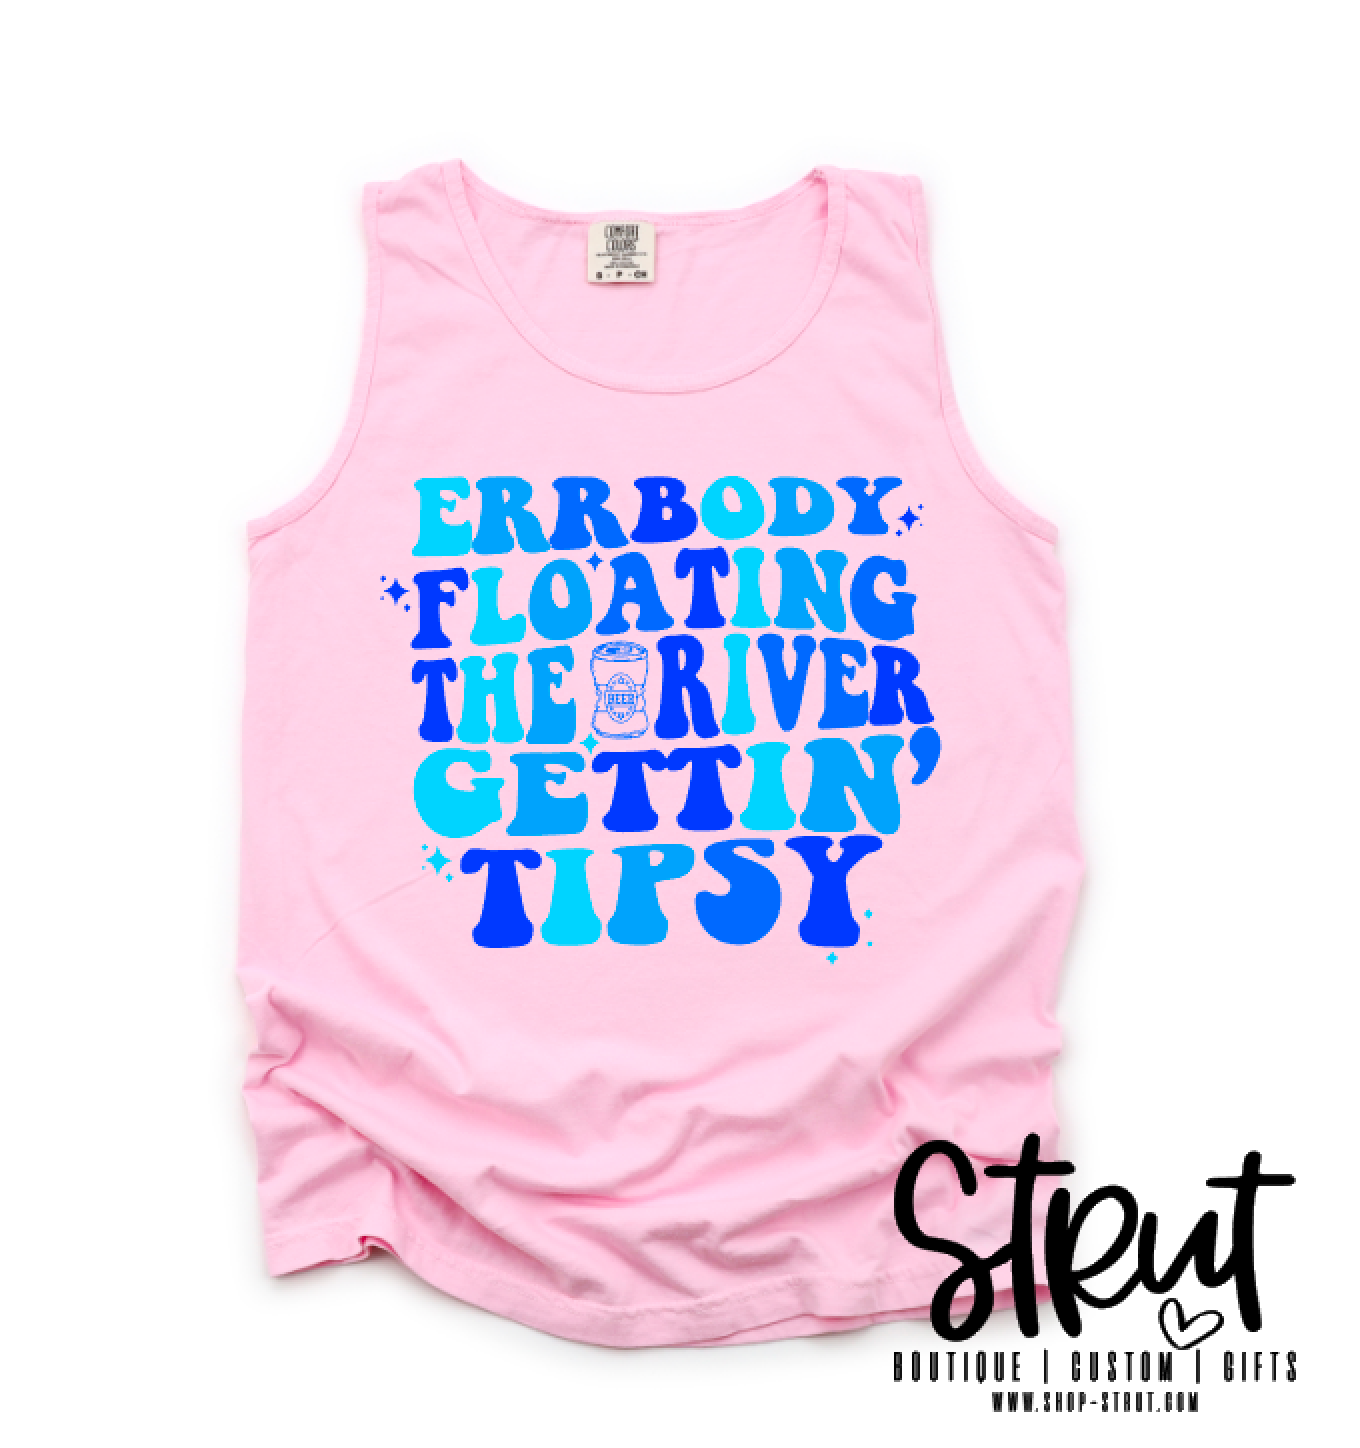 Errbody Floating The River Gettin' Tipsy - Tank or Tee